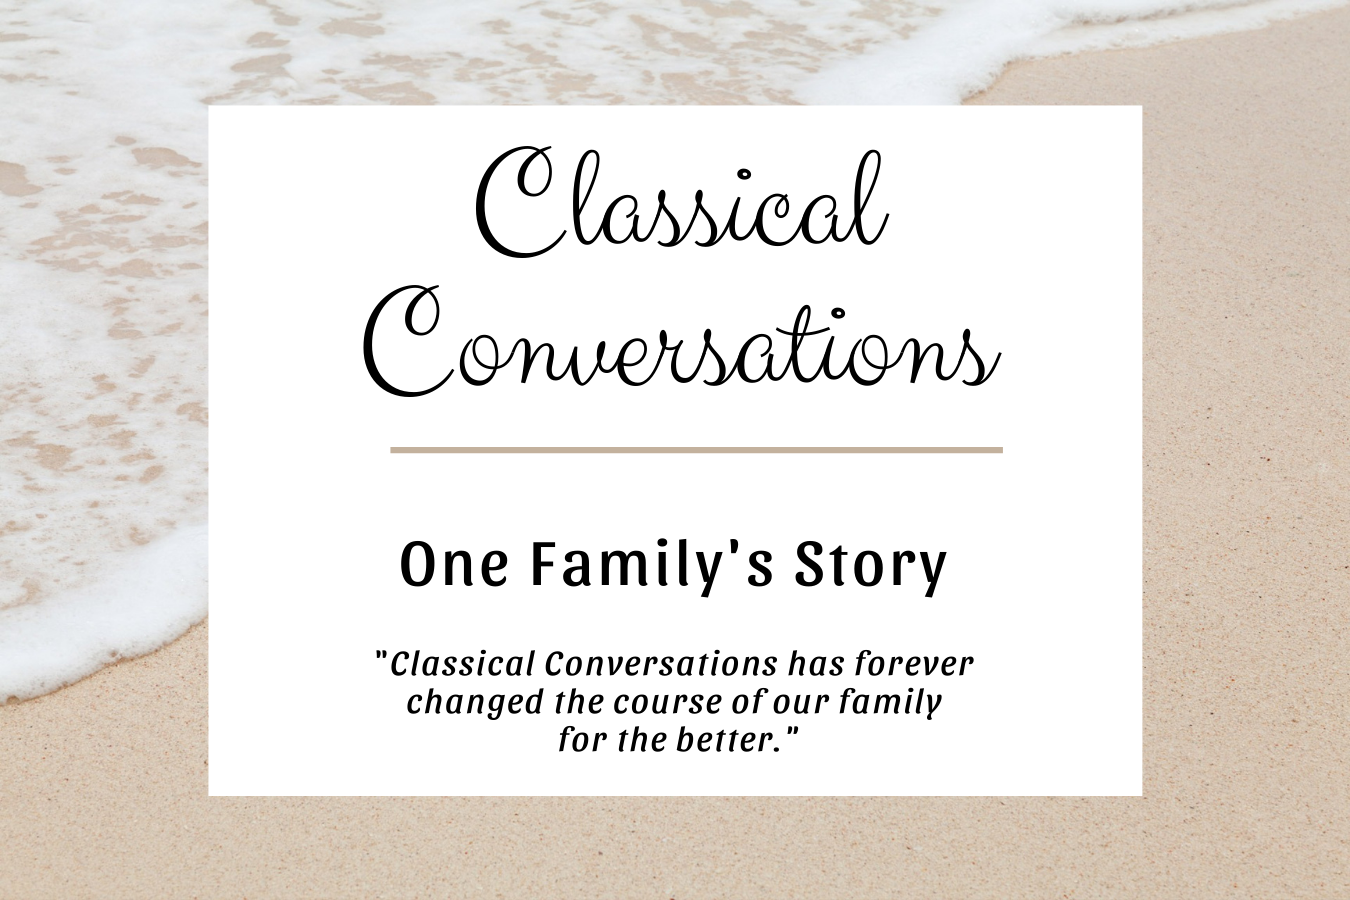 Classical conversations one family's story blog feature image